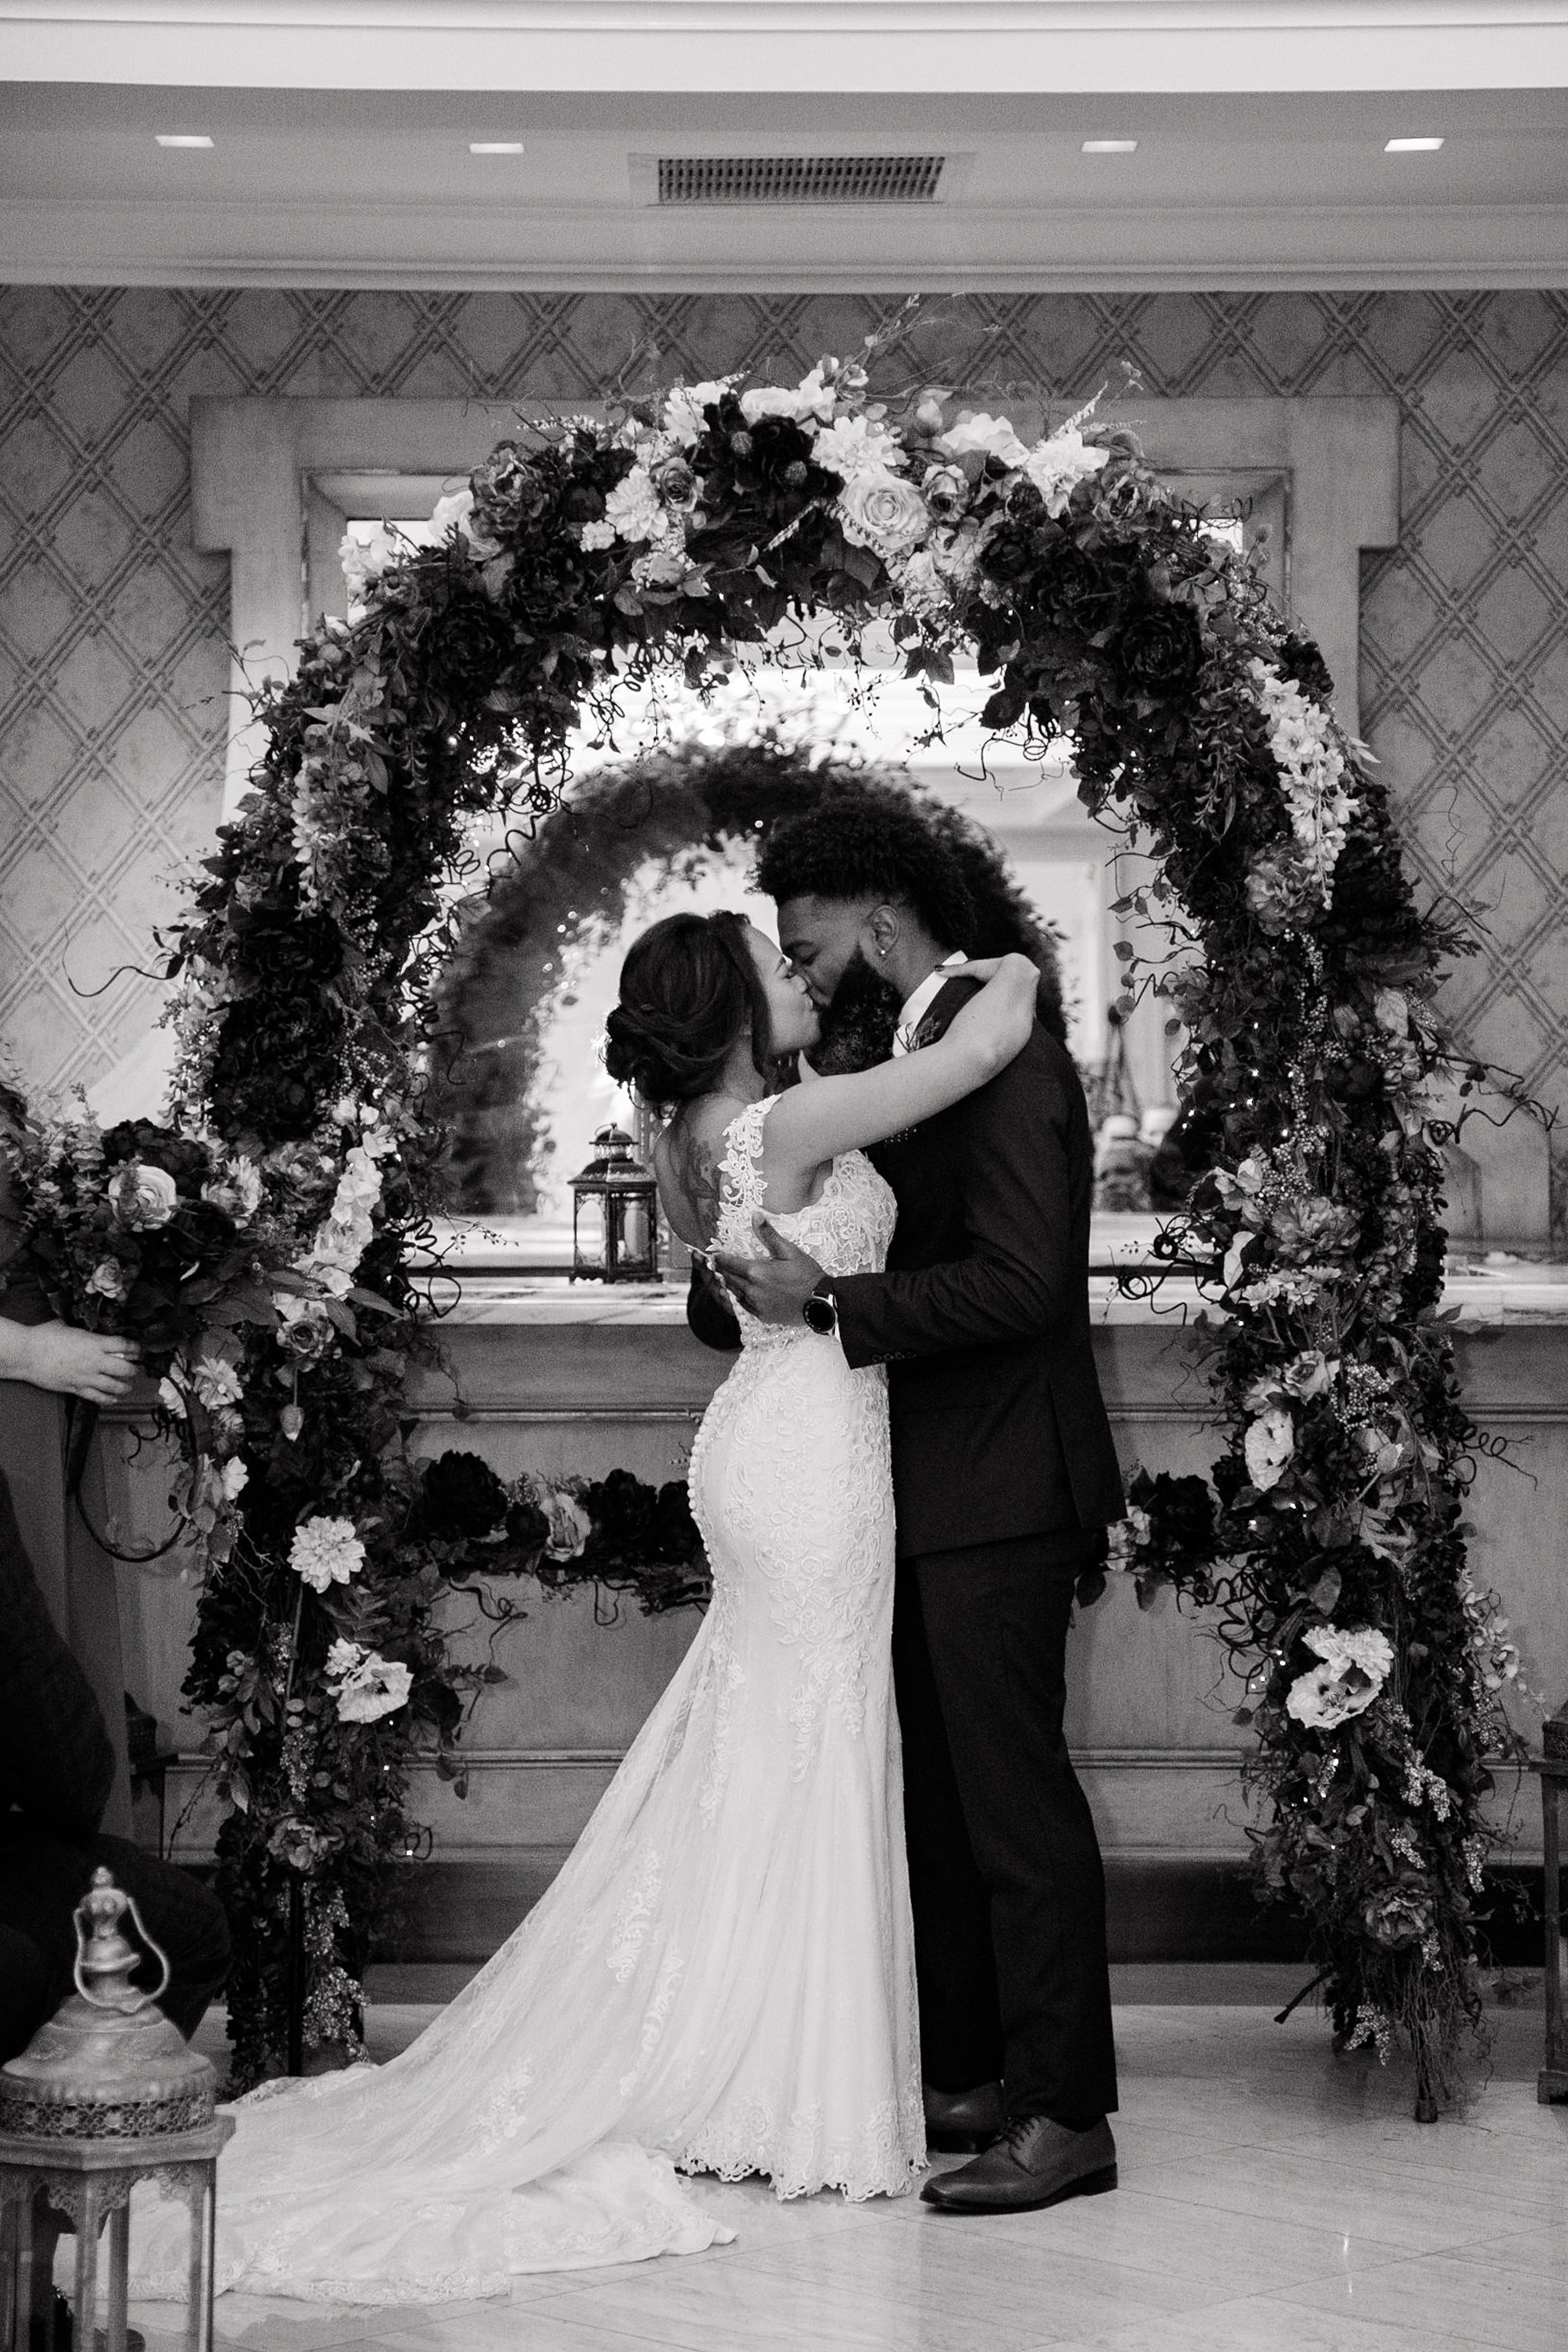  december wedding, Darian and Holland's wedding at the Rosewood Mansion in Dallas